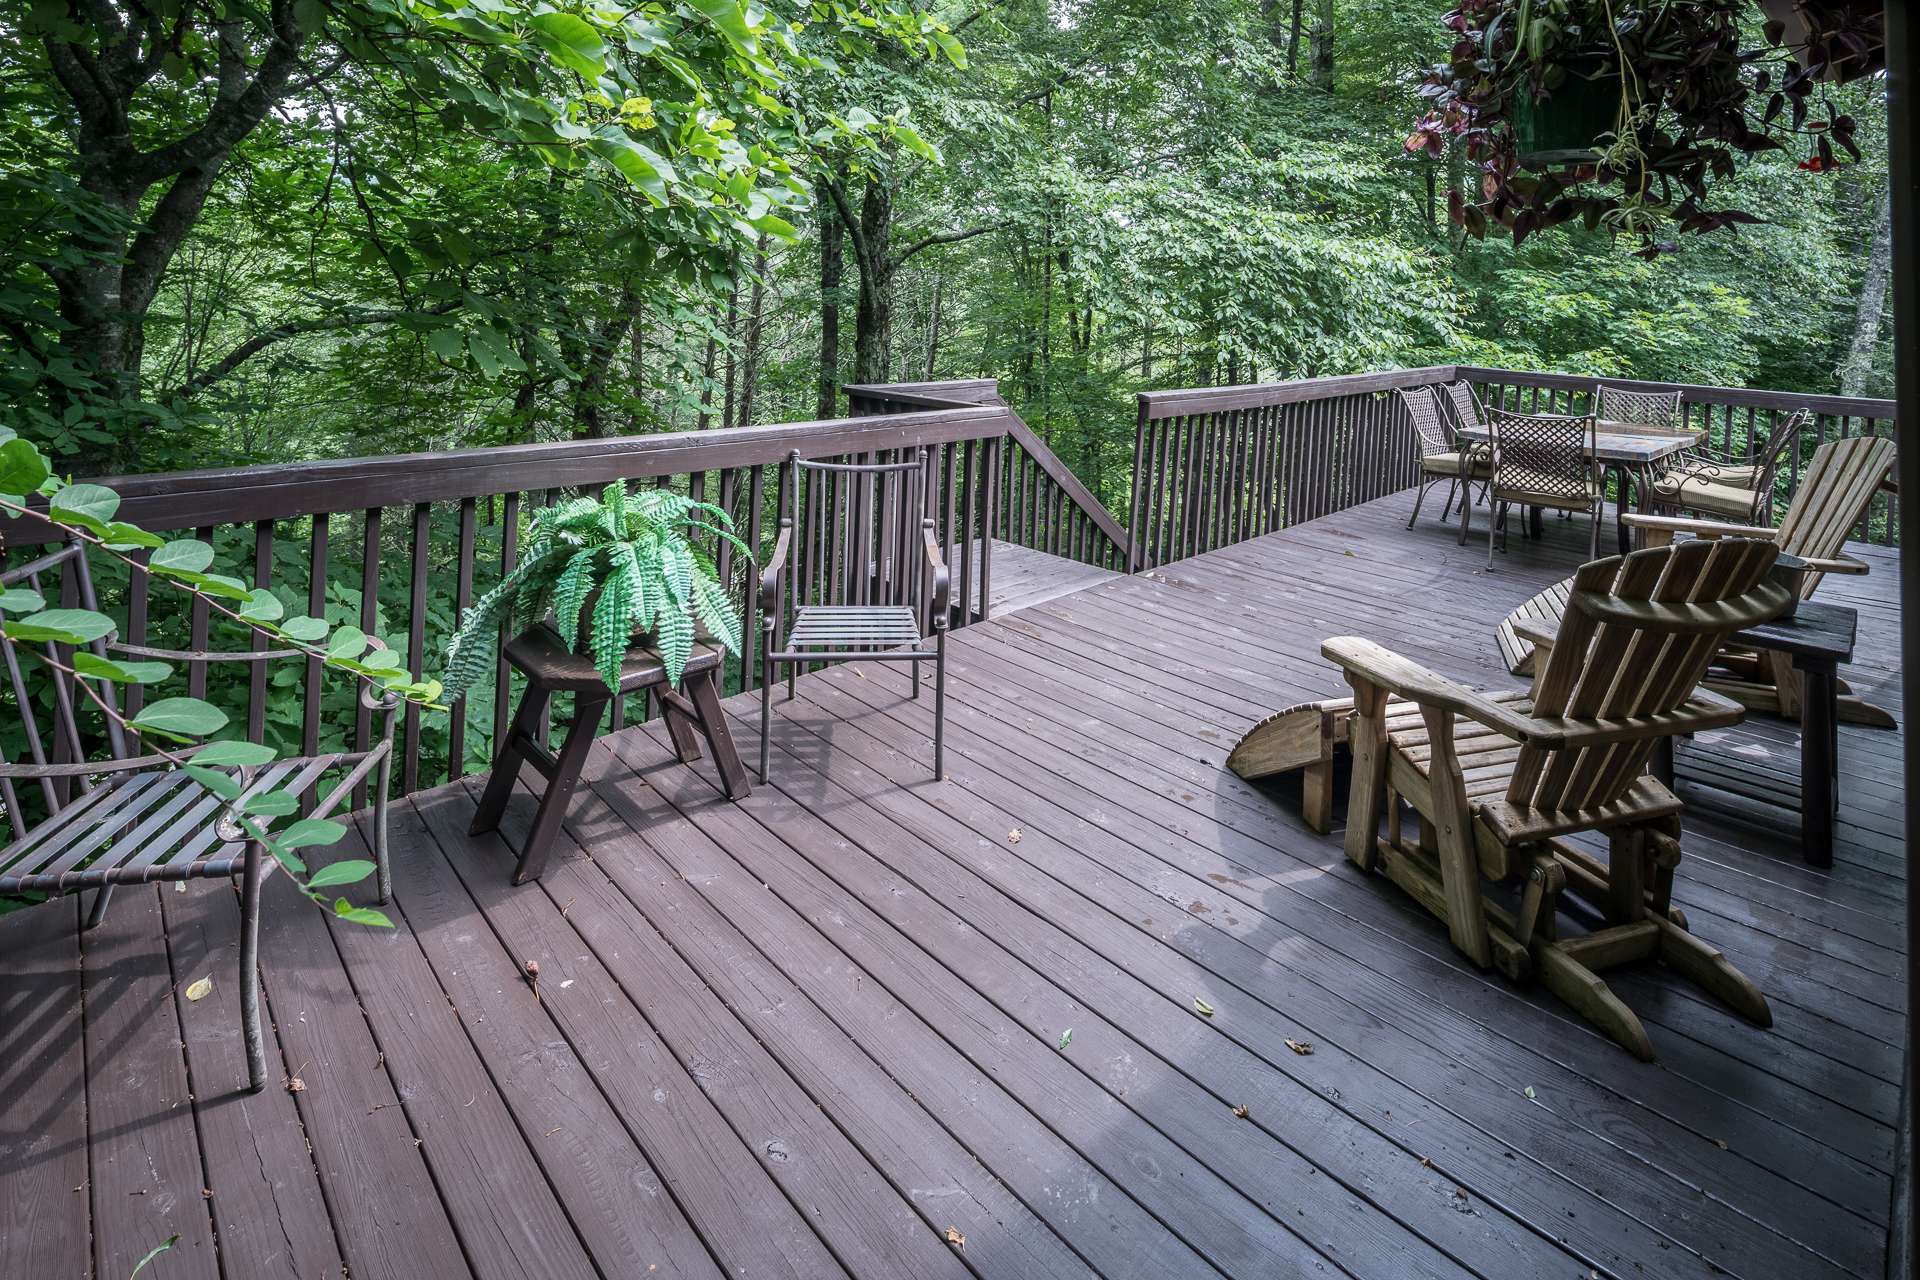 The large back deck provides for numerous seating areas for your family and friends.